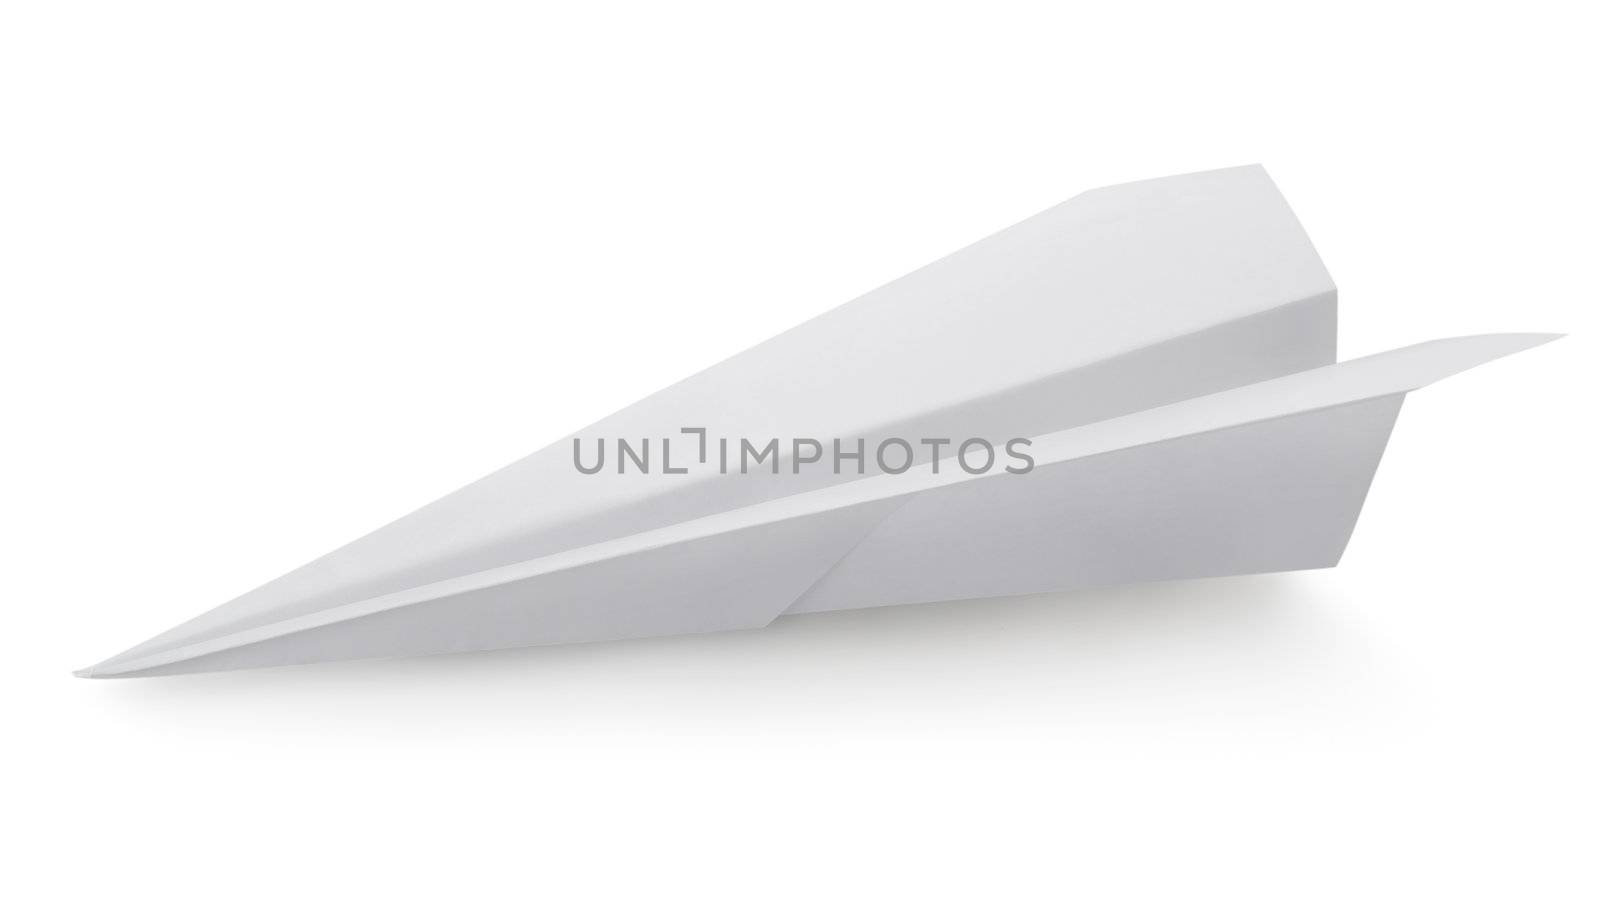 Plane made of a paper by Givaga